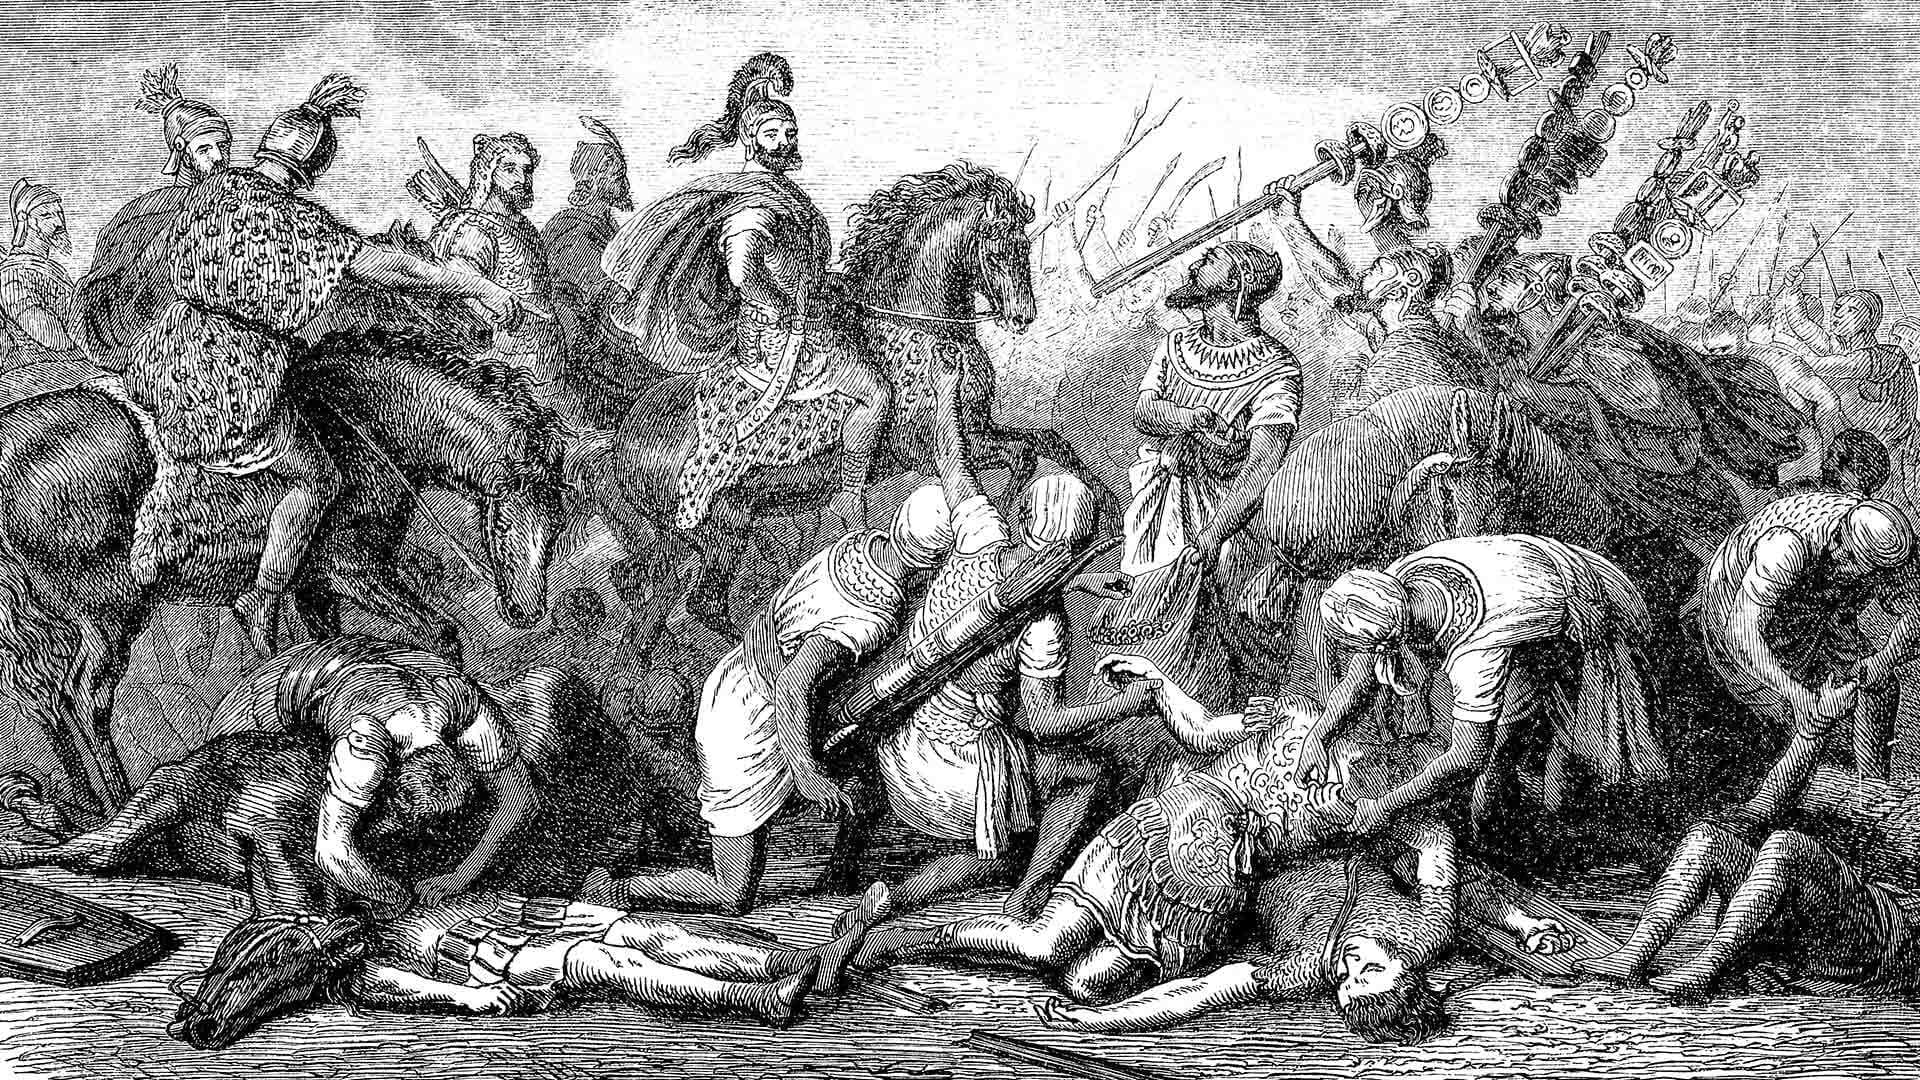 Image of Romans and Carthaginians fighting